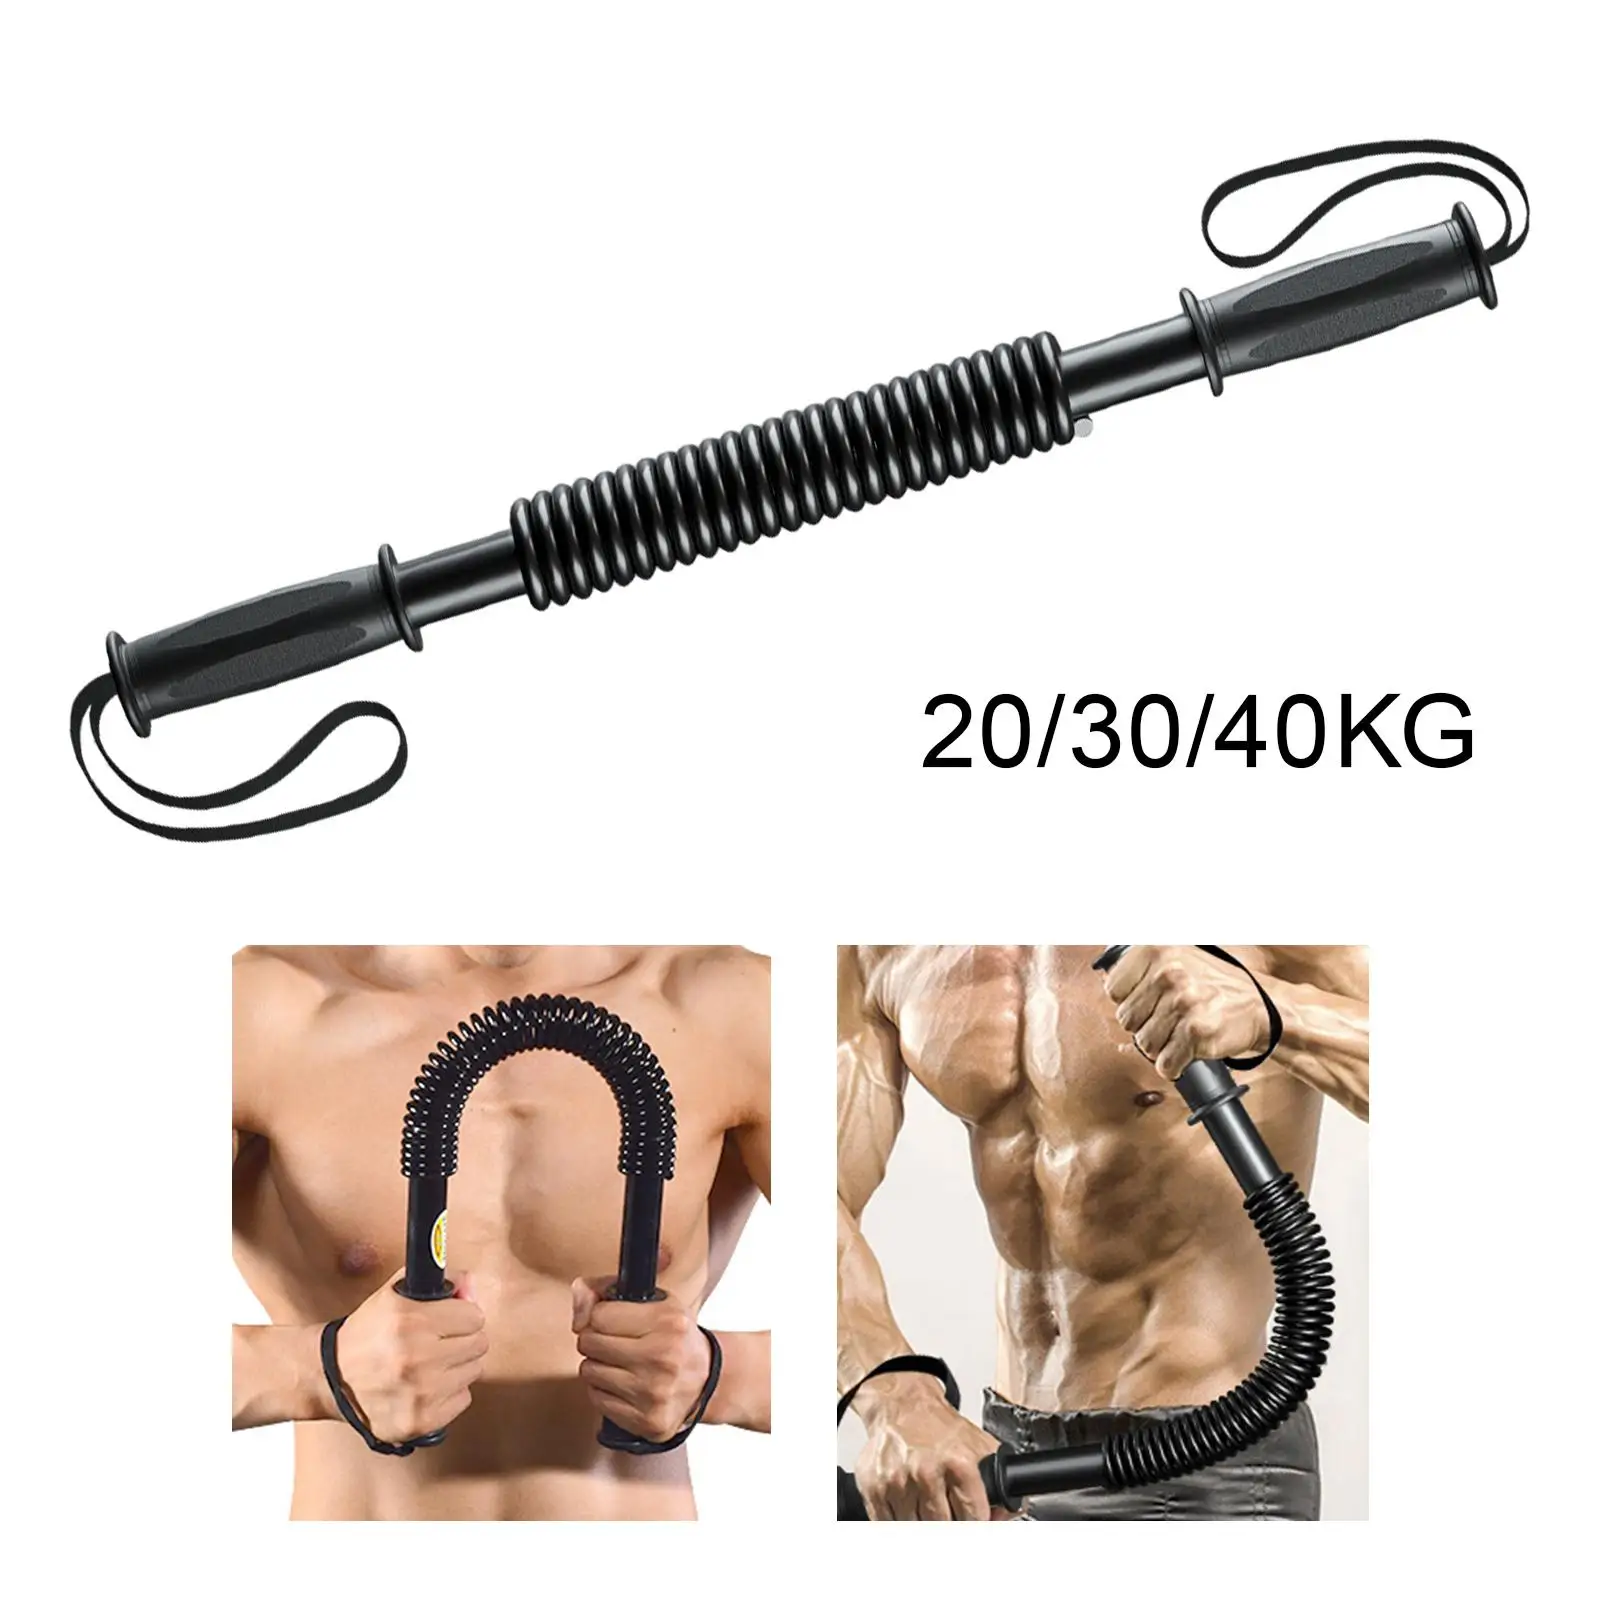 Upper Body Exercise Workout Equipment Chest Expander Power Twister Bar for Muscle Training Women Men Shoulder Bicep Home Gym